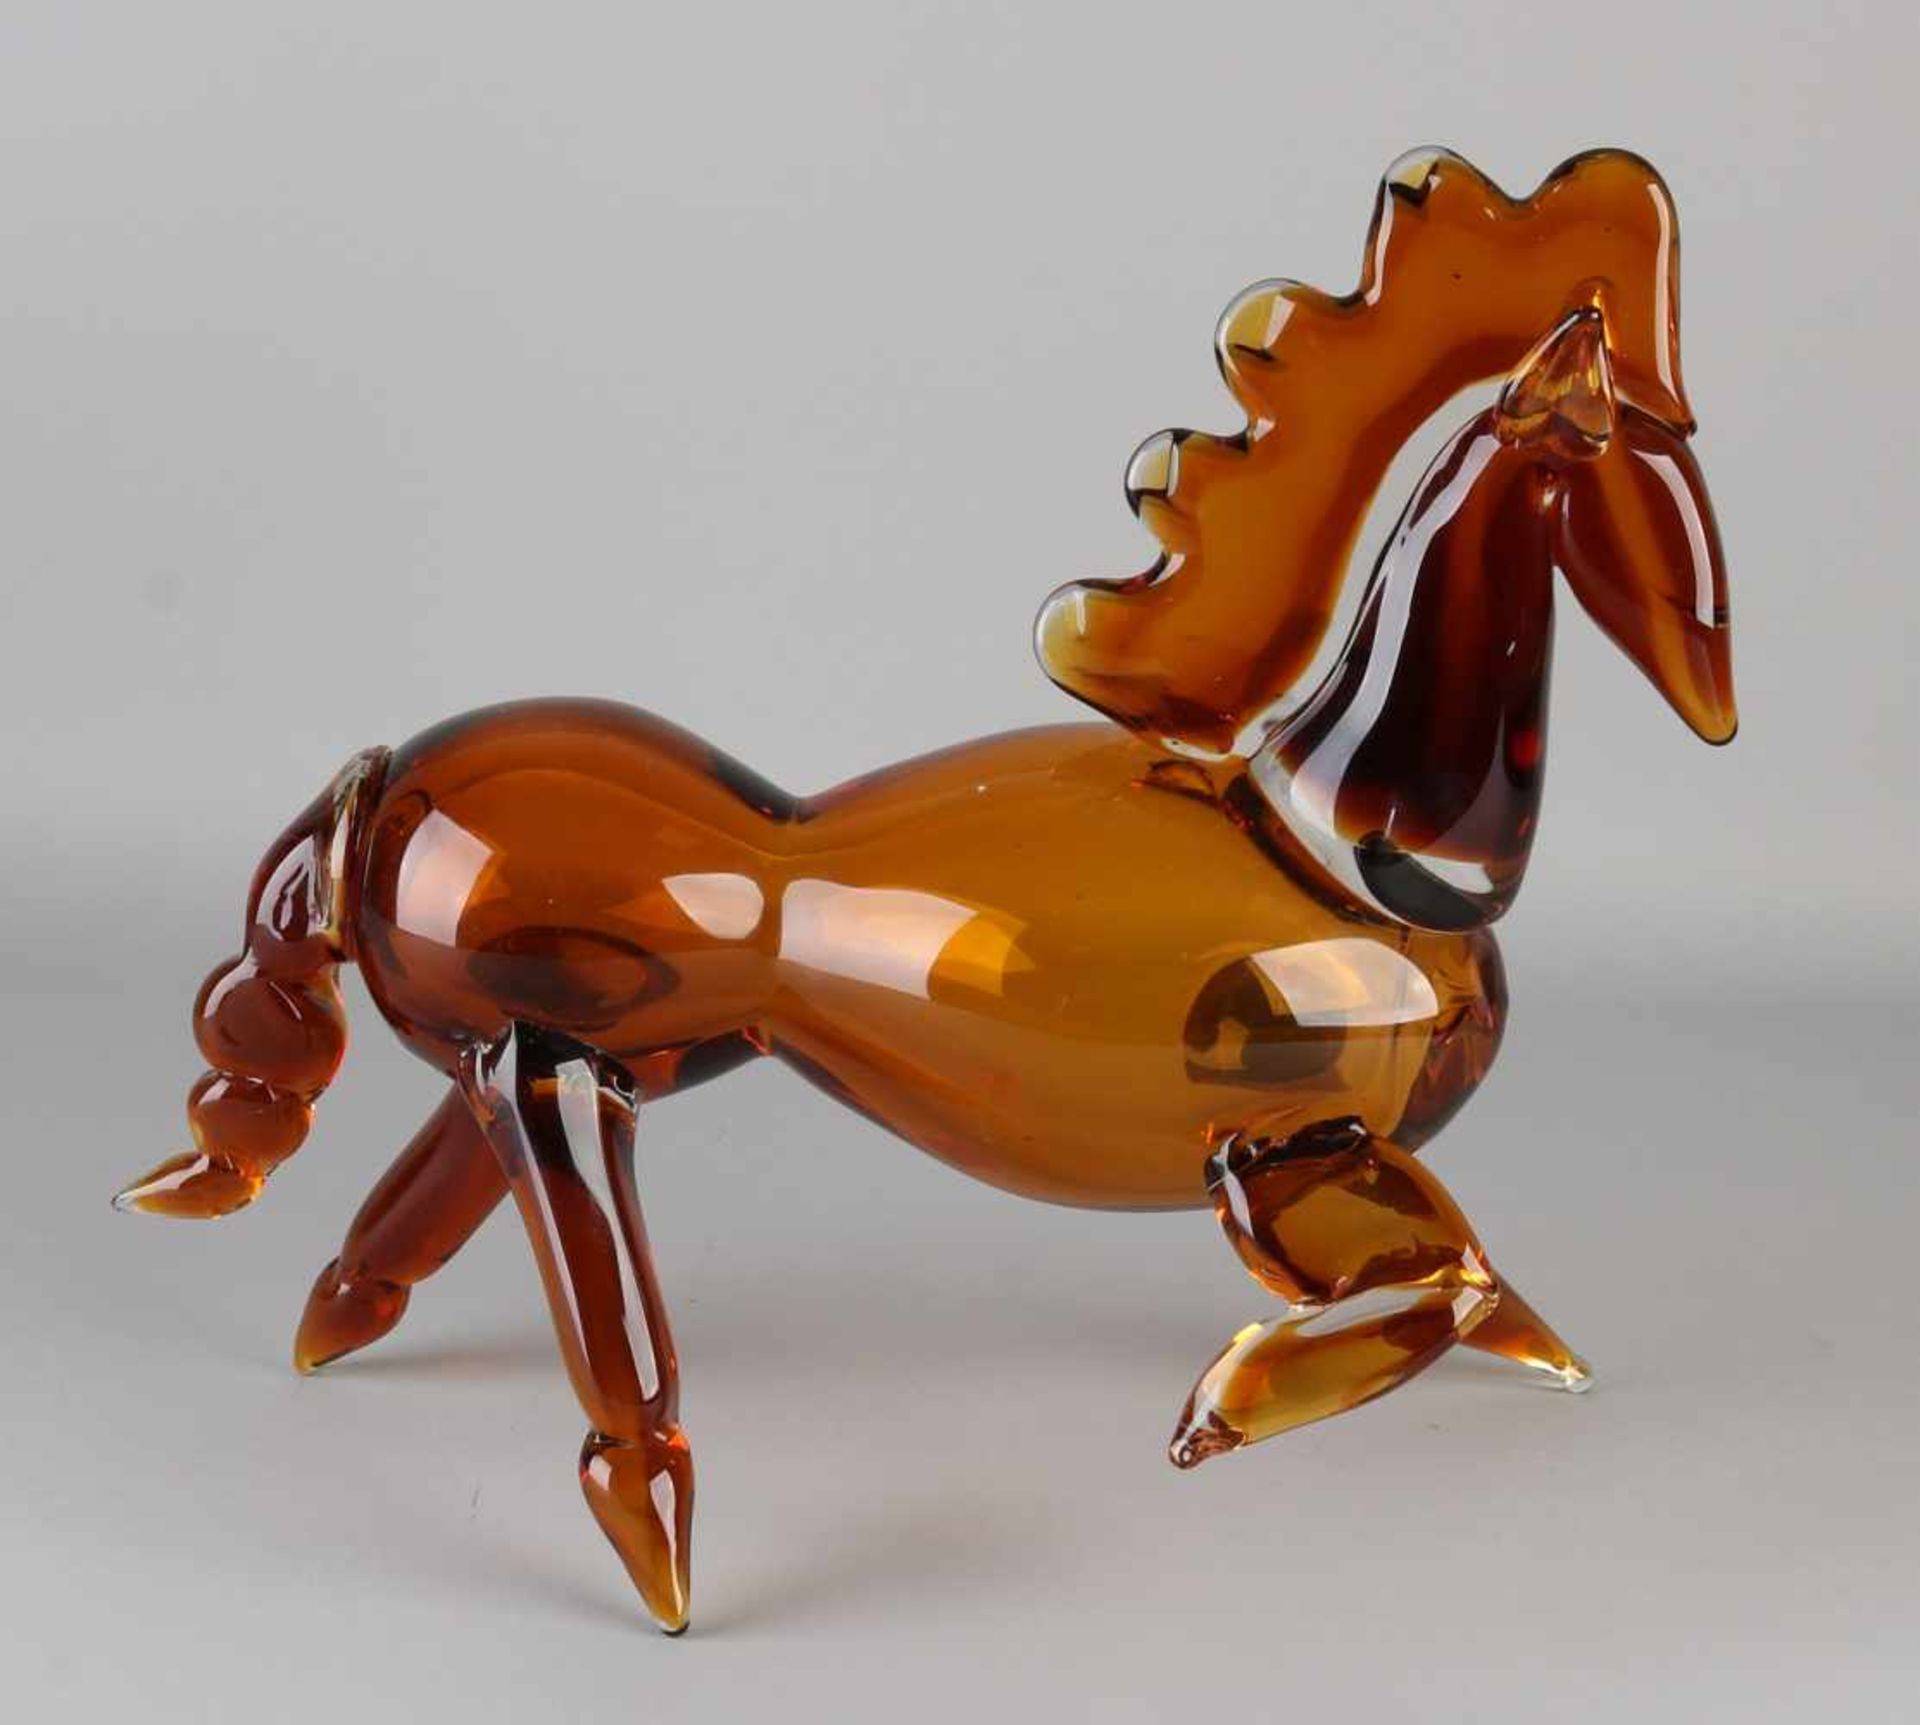 Large glass Murano style horse. In the color brown. 21st century. Size: 33 x 37 x 22 cm. In good